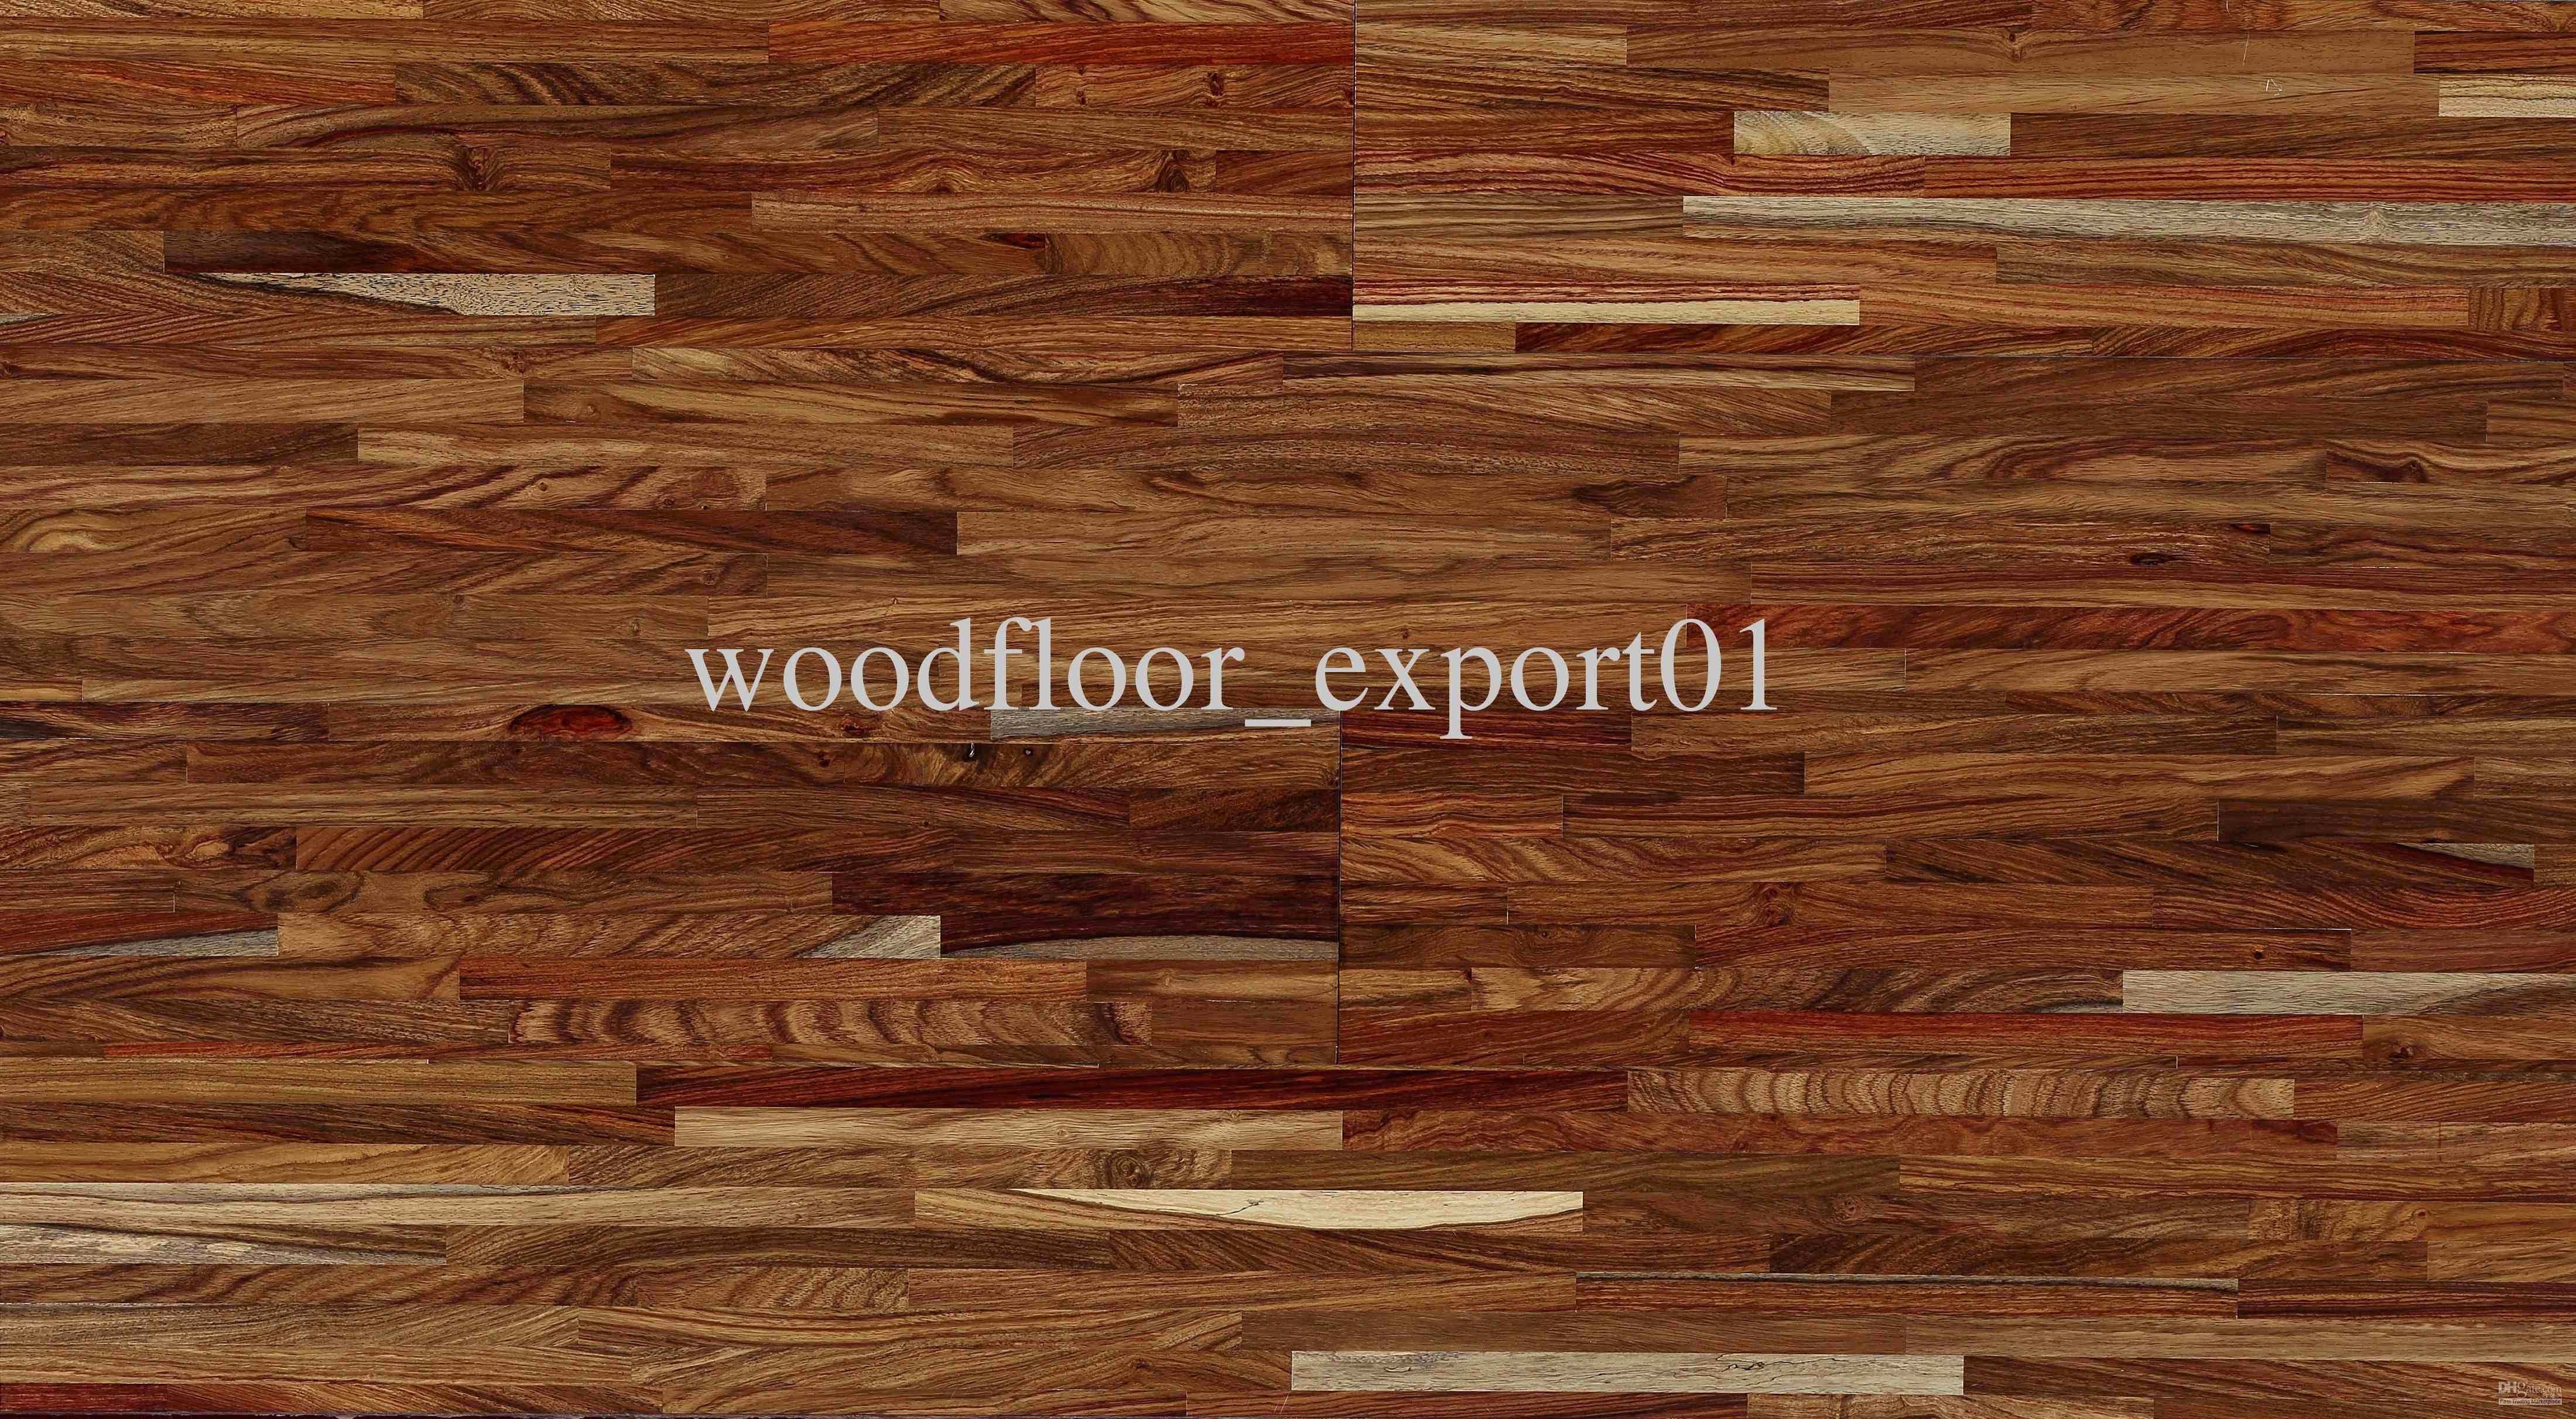 Best Way to Install Engineered Hardwood Flooring On Concrete Slab Of 17 Best Of Install Hardwood Floor Image Dizpos Com Intended for Install Hardwood Floor Best Of 50 Unique Hardwood Floor Installers Near Me Graphics 50 S Images